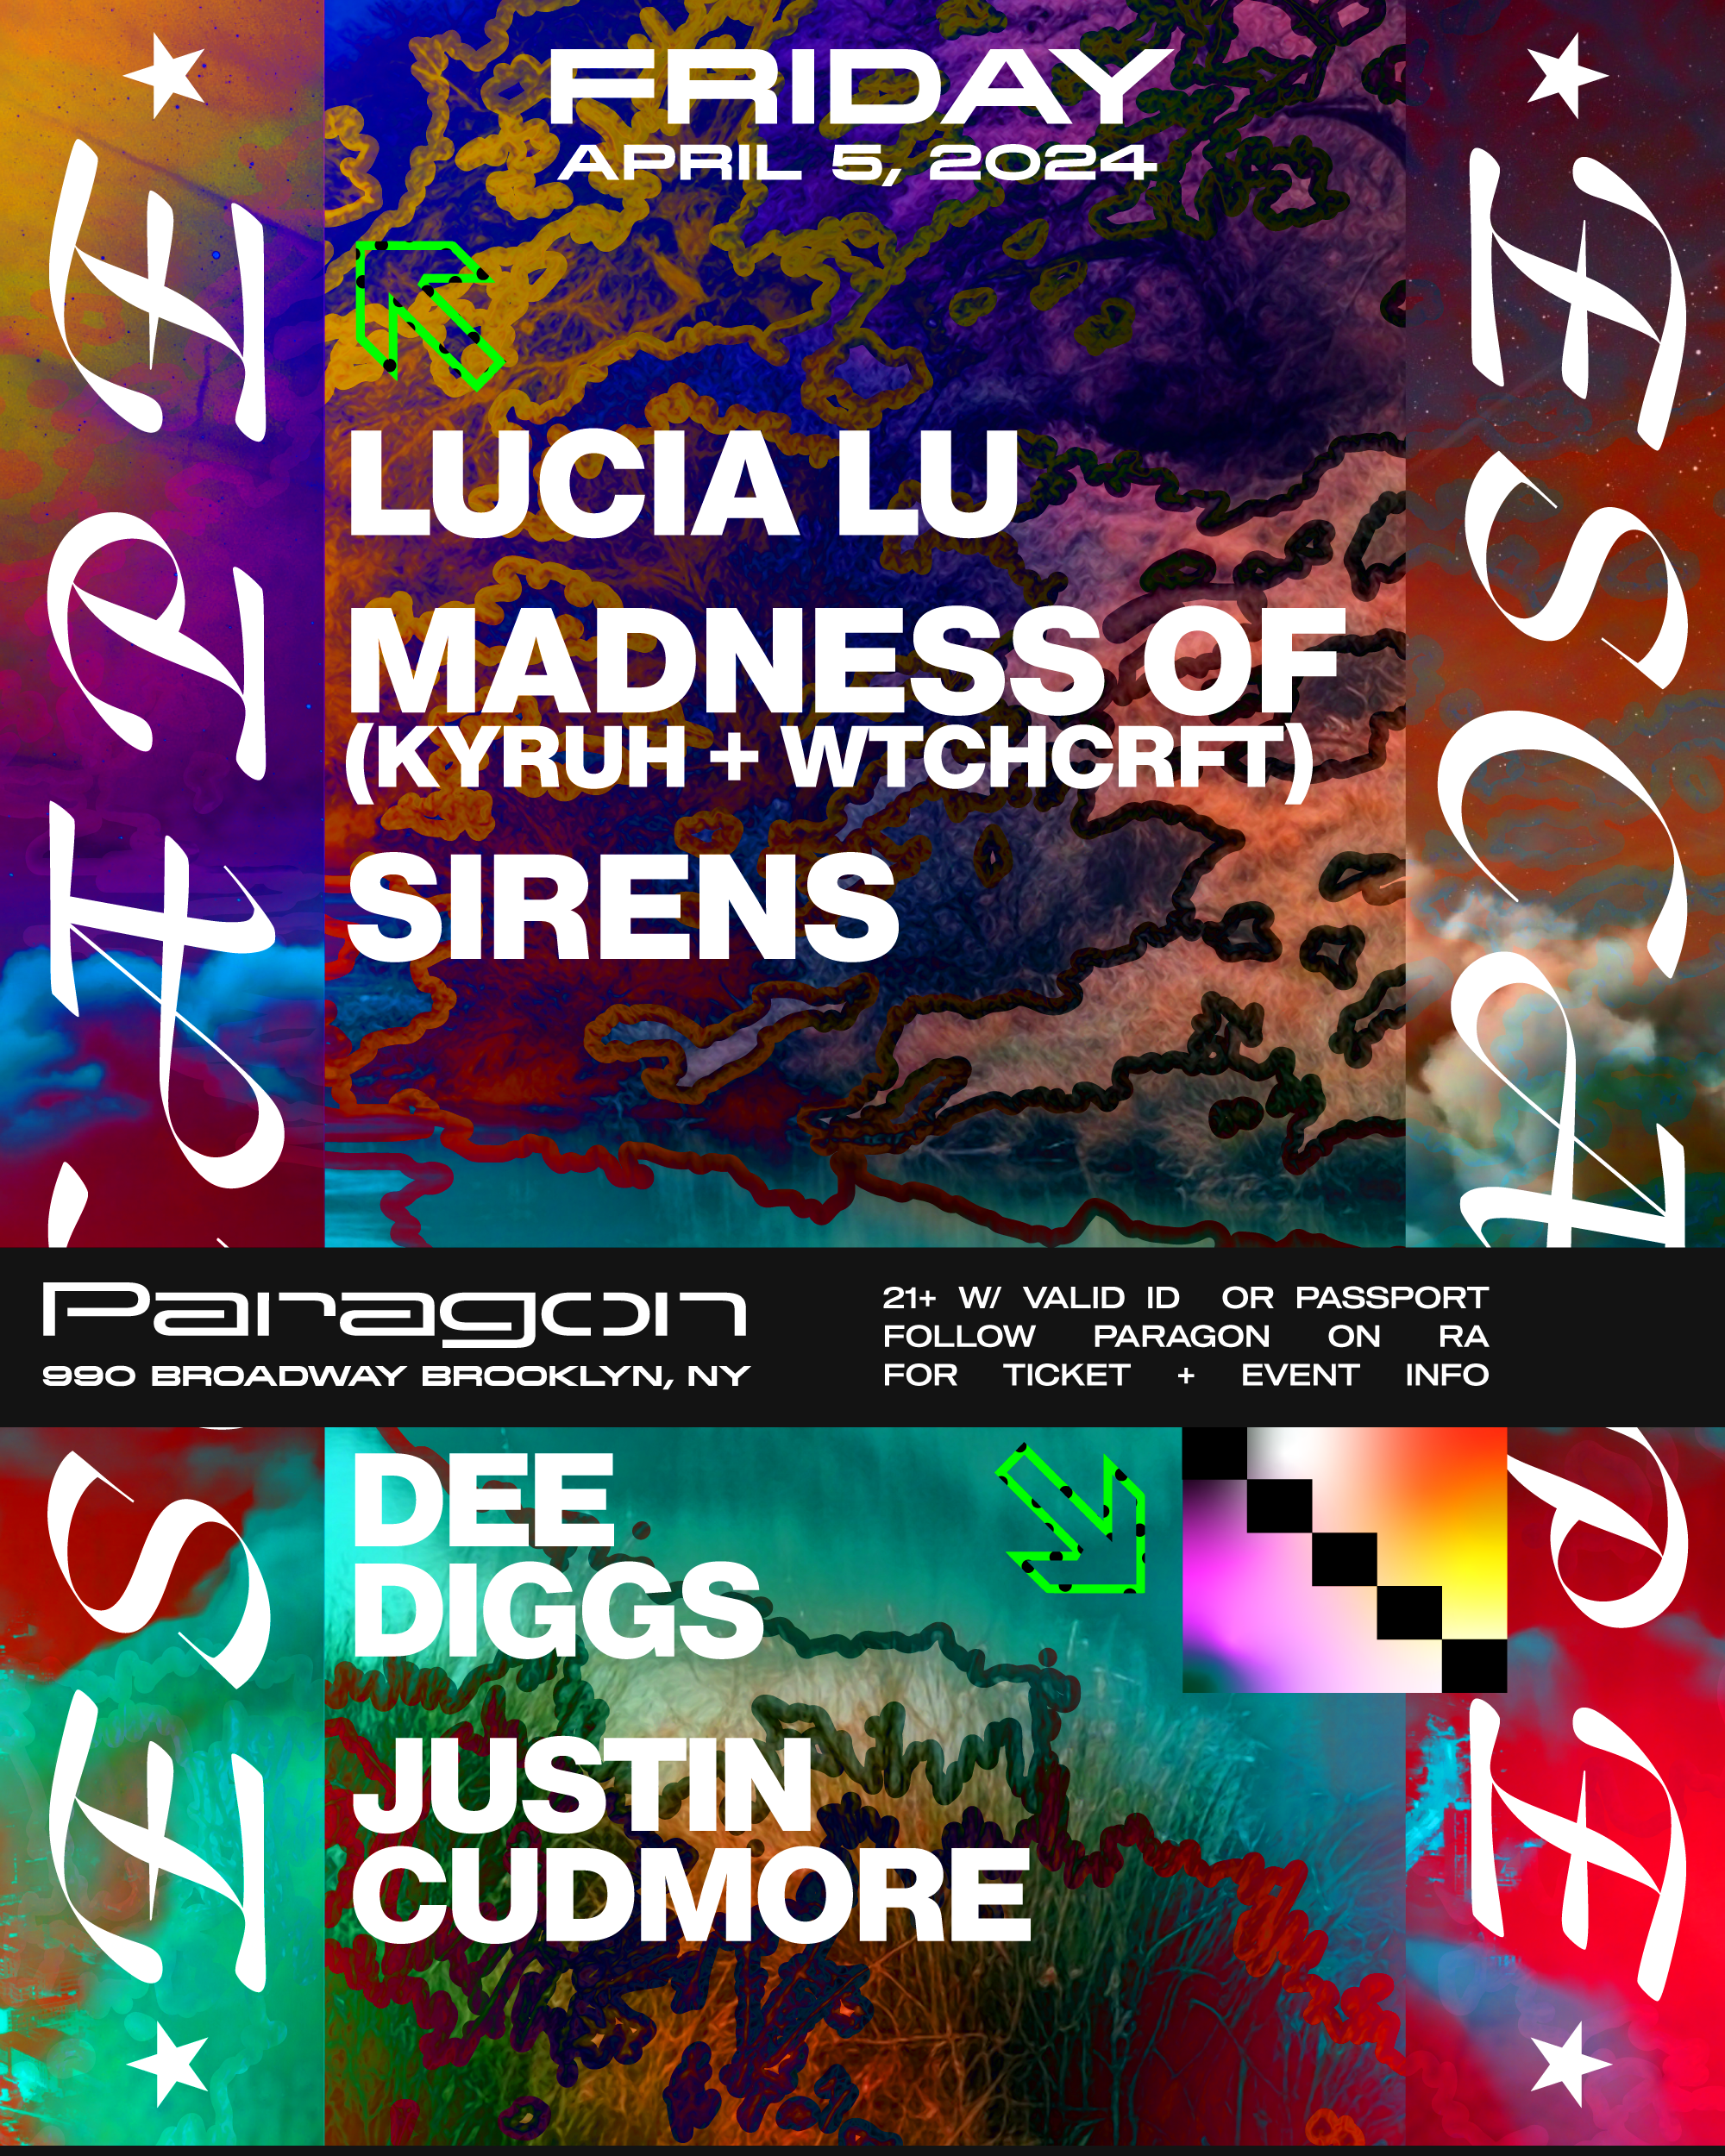 Escape: Lucia Lu, Madness Of, Sirens + Dee Diggs, Justin Cudmore - Página frontal